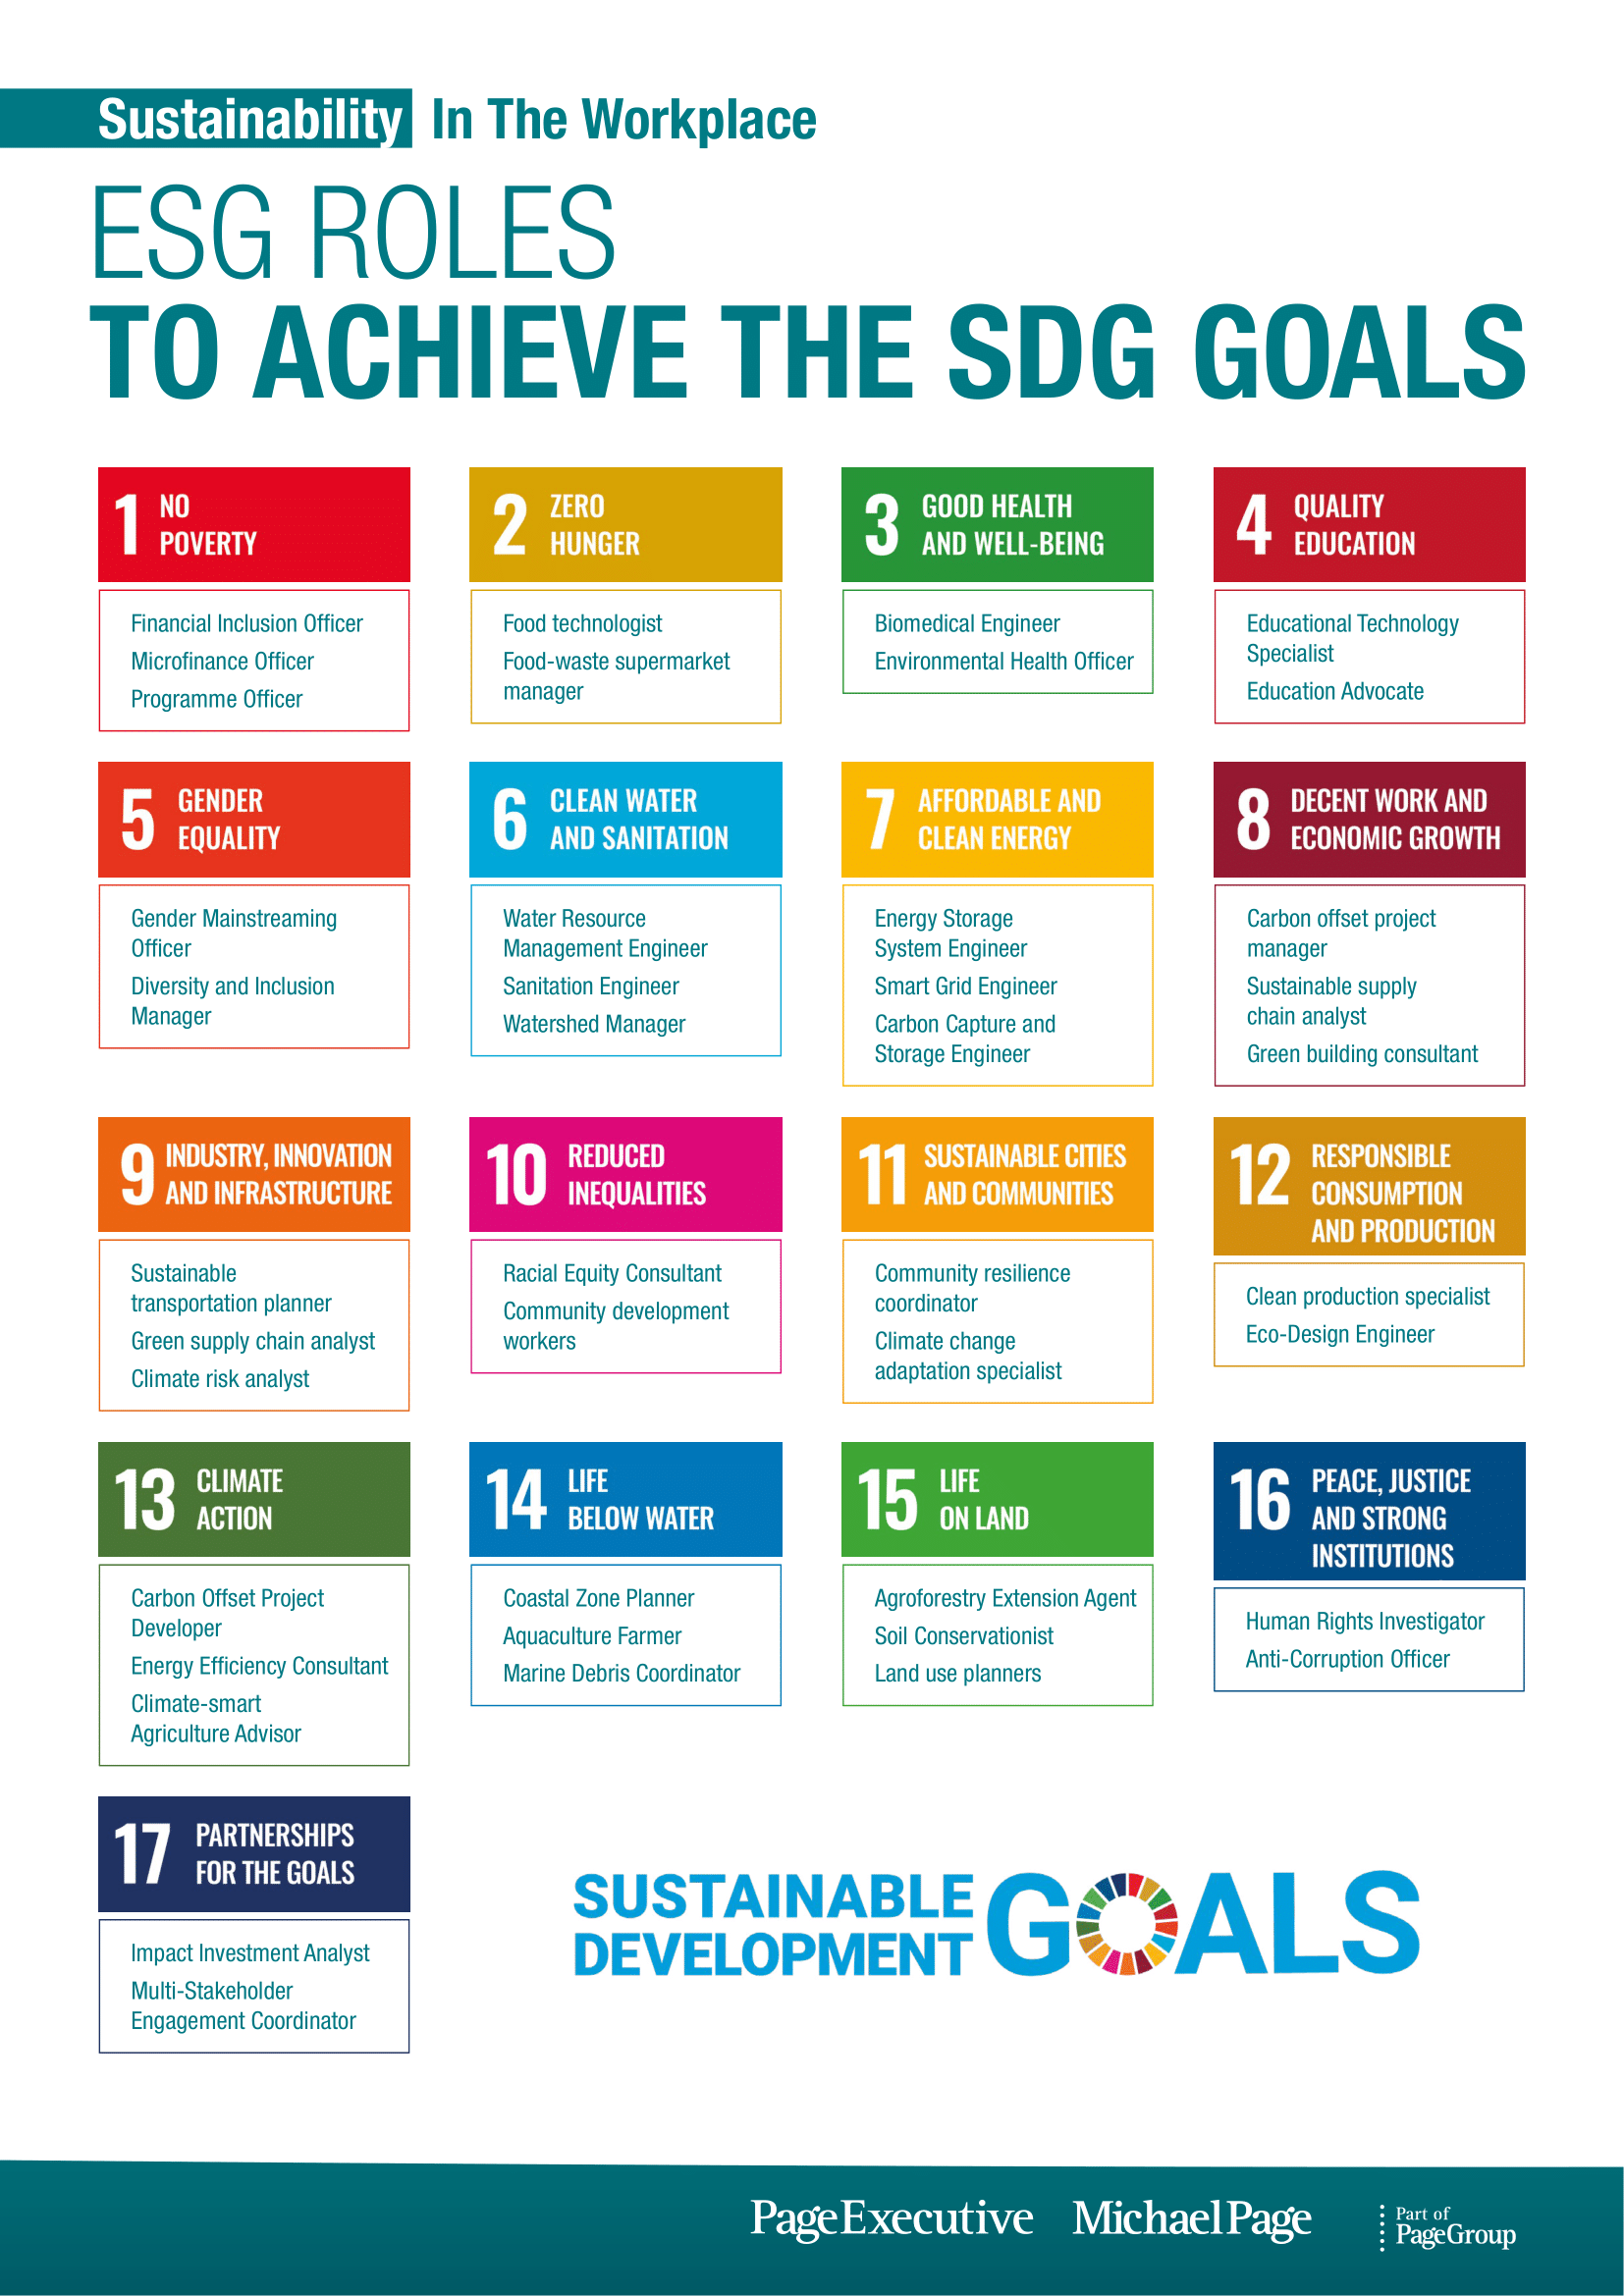 List of ESG roles to help achieve the SDG goals in 2023. 